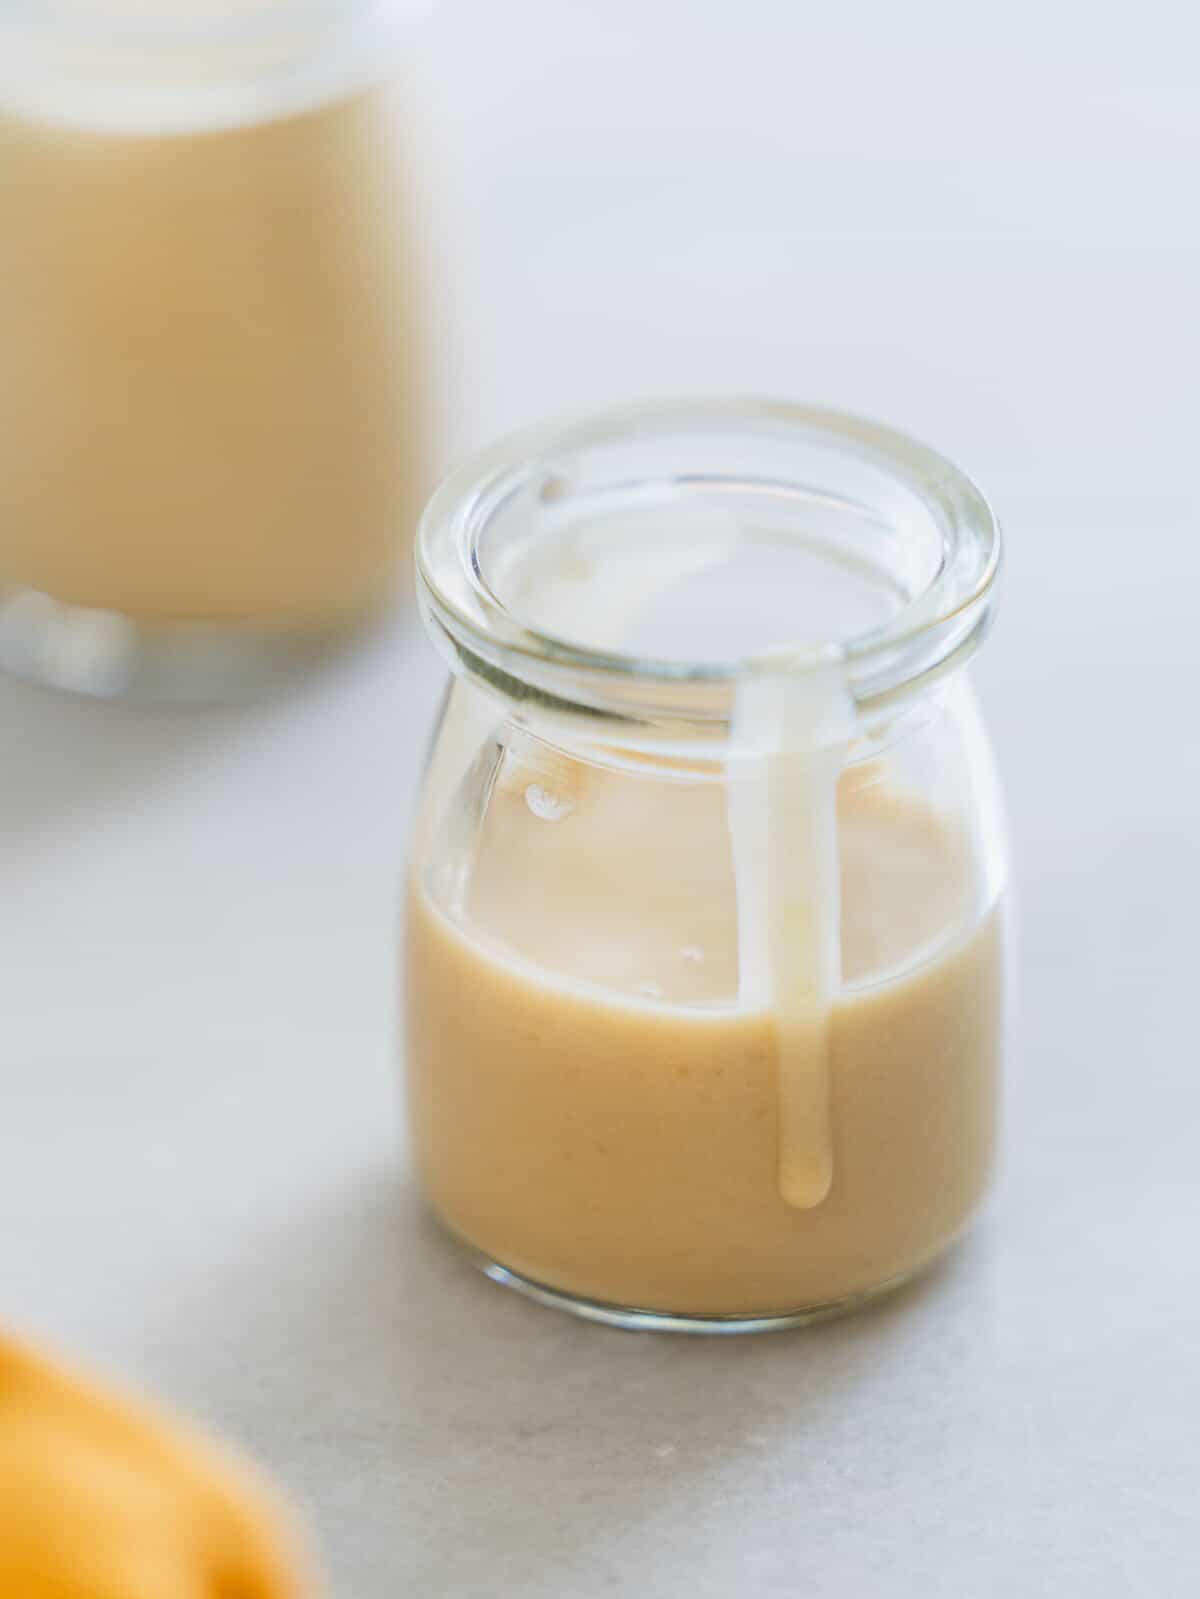 tahini dressing for kale salad in a glass recipient.